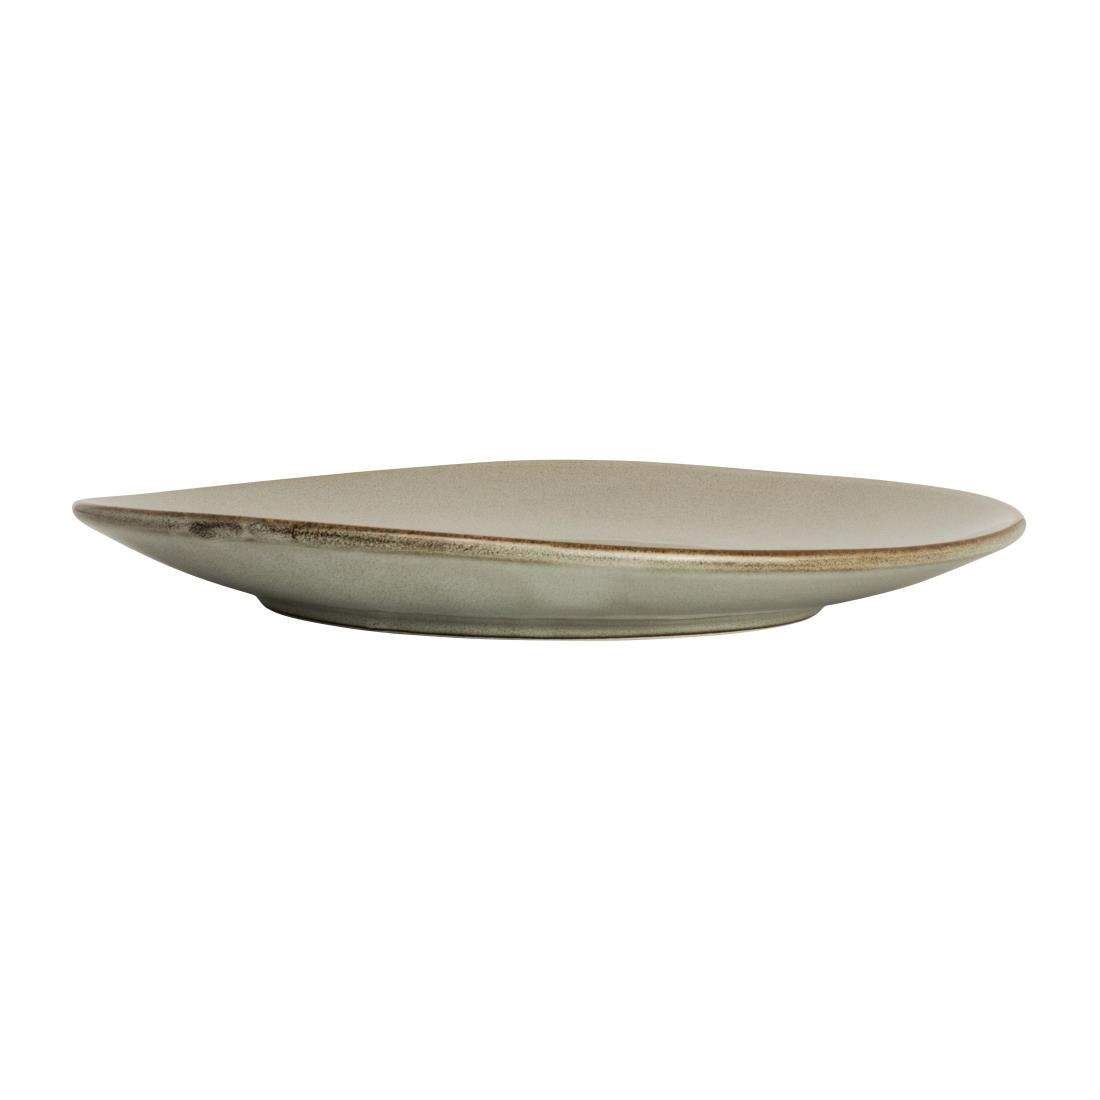 VV2626 Robert Gordon Potters Collection Pier Organic Plates 280mm (Pack of 12)